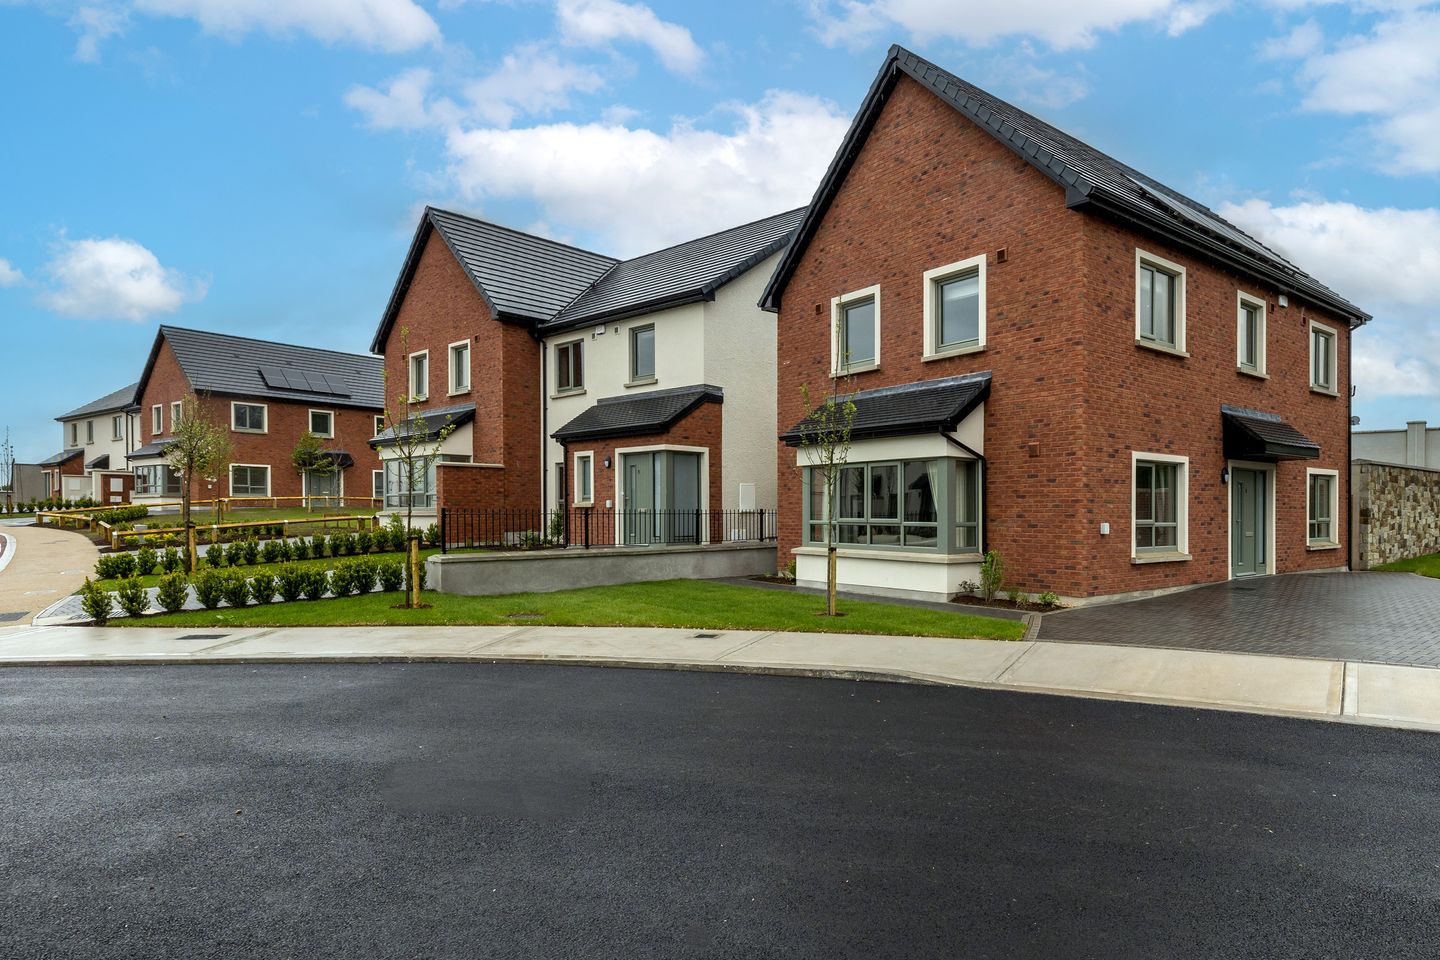 The Orchid, The Meadows - Final 4 Bed House Type Available, The Meadows - Final 4 Bed House Type Available, Kill, Co. Kildare